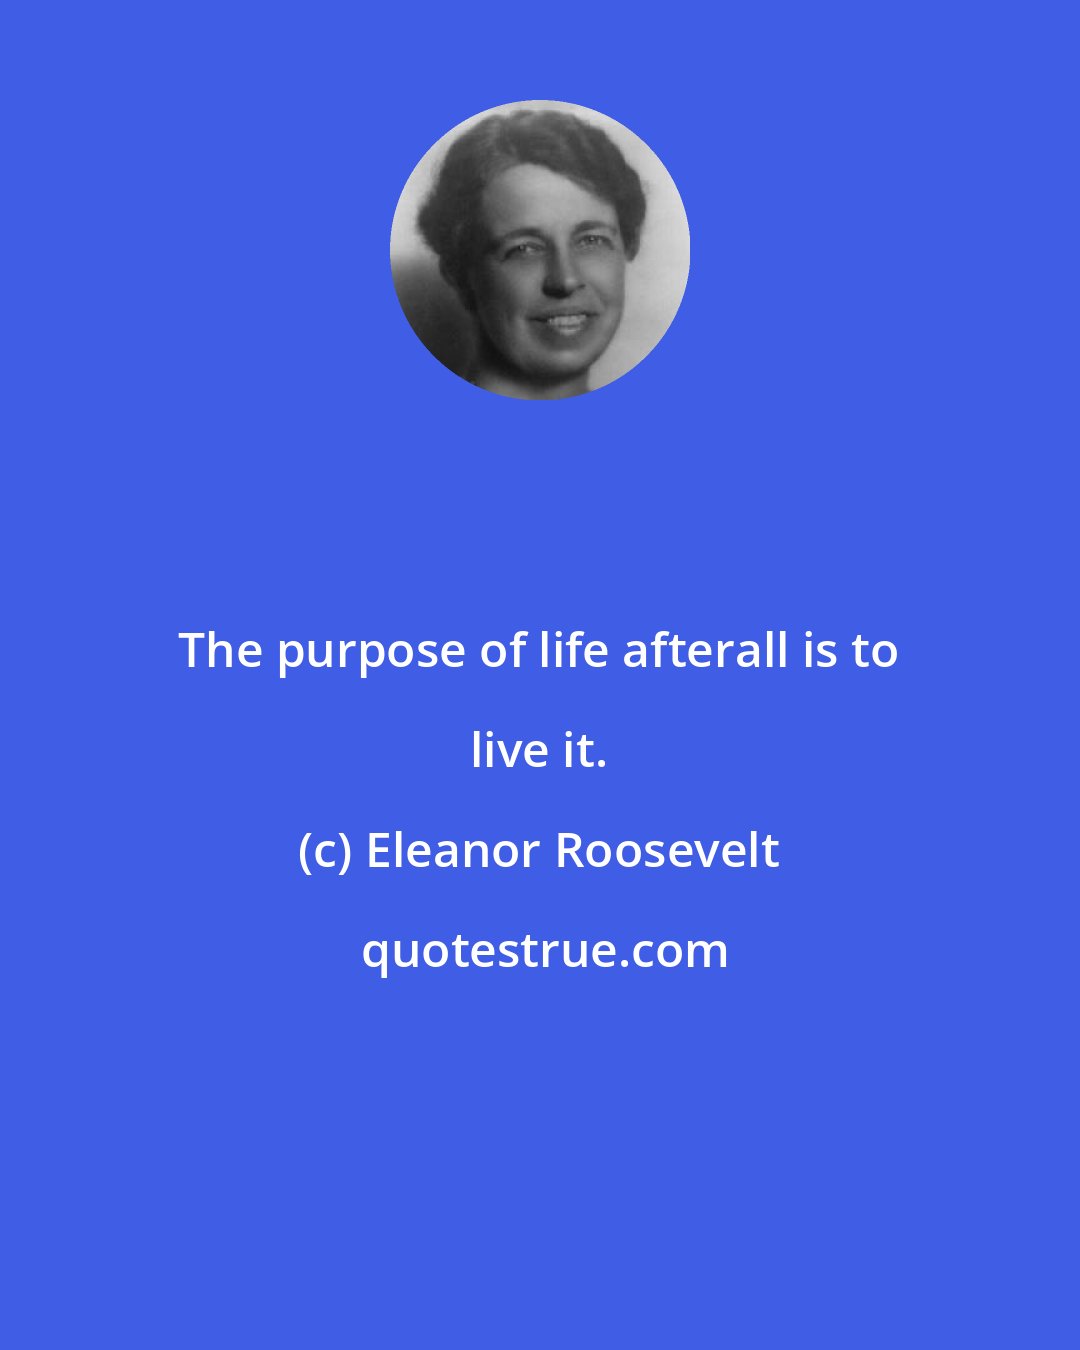 Eleanor Roosevelt: The purpose of life afterall is to live it.